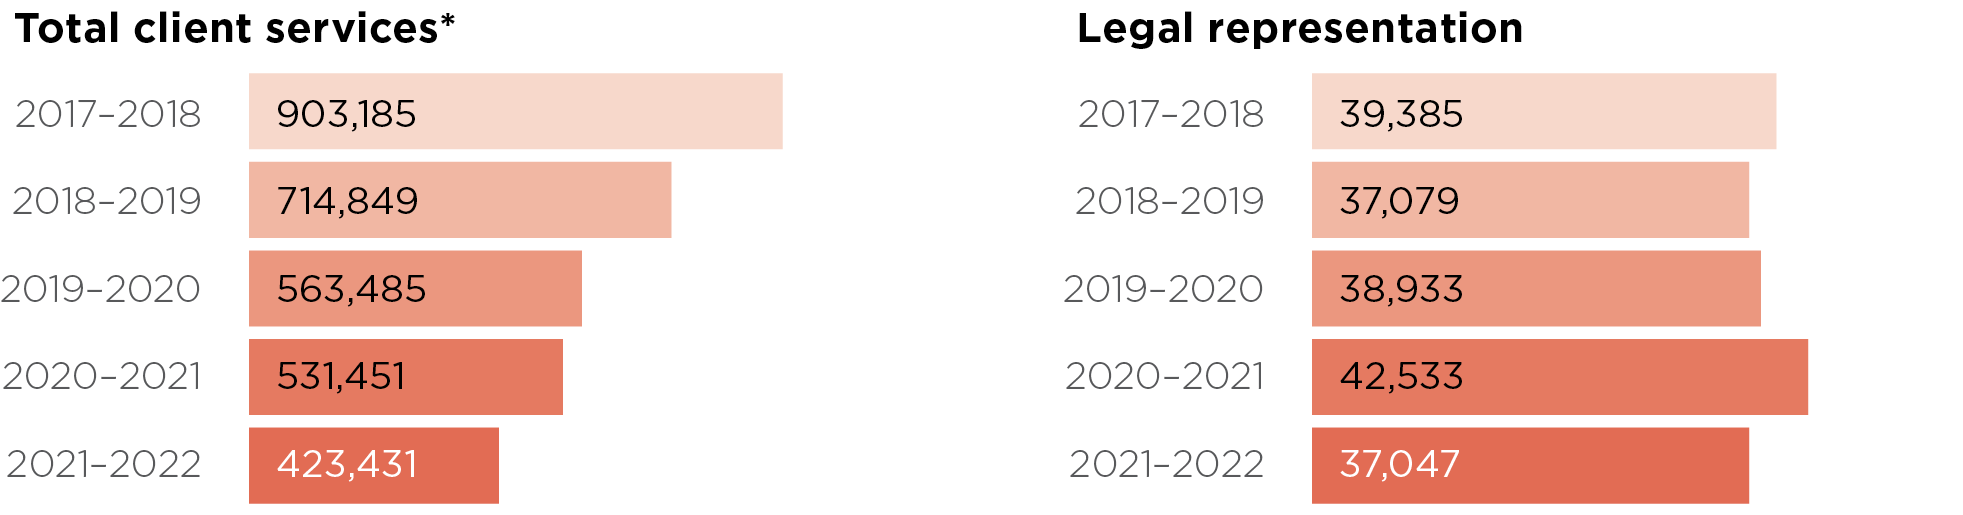 5 years summary of total client services and legal representation